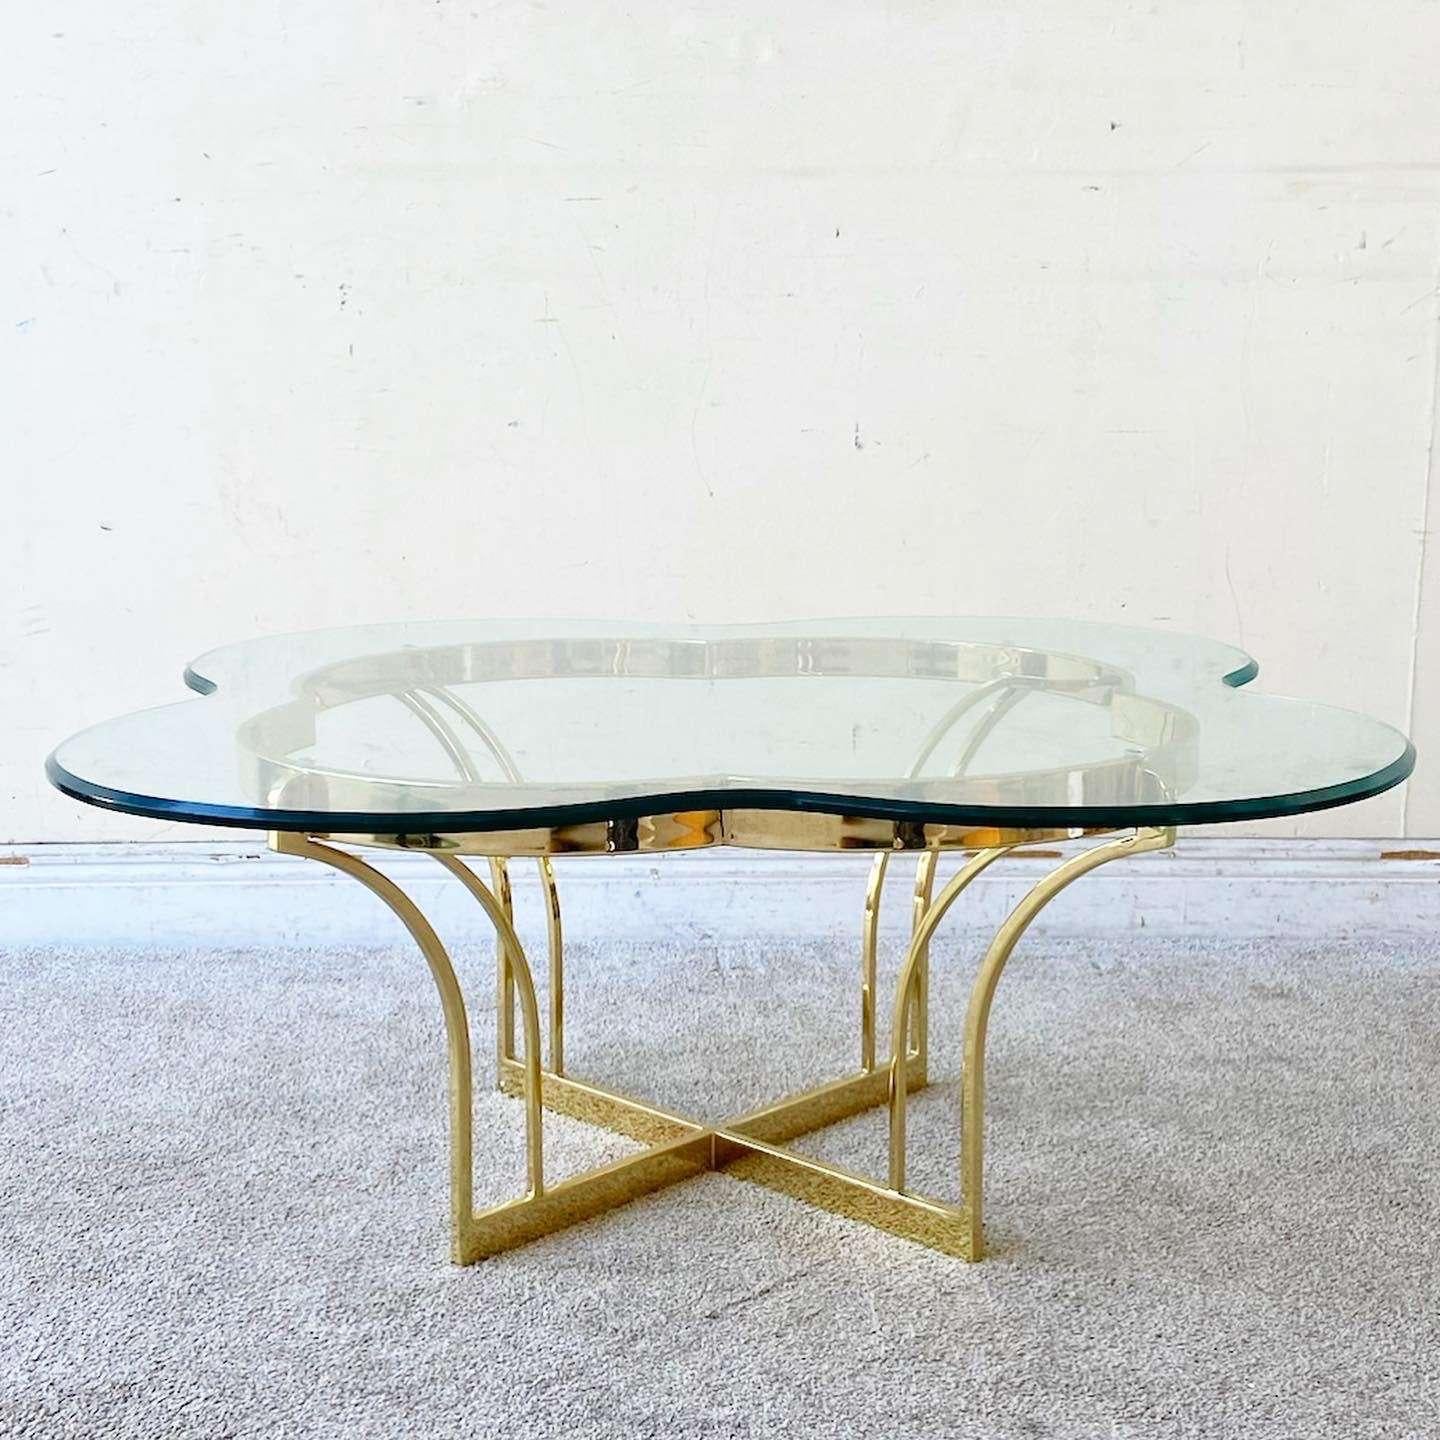 Amazing vintage Hollywood regency coffee table. Features a sculpted 4 clover shaped glass top with a gold metal base.